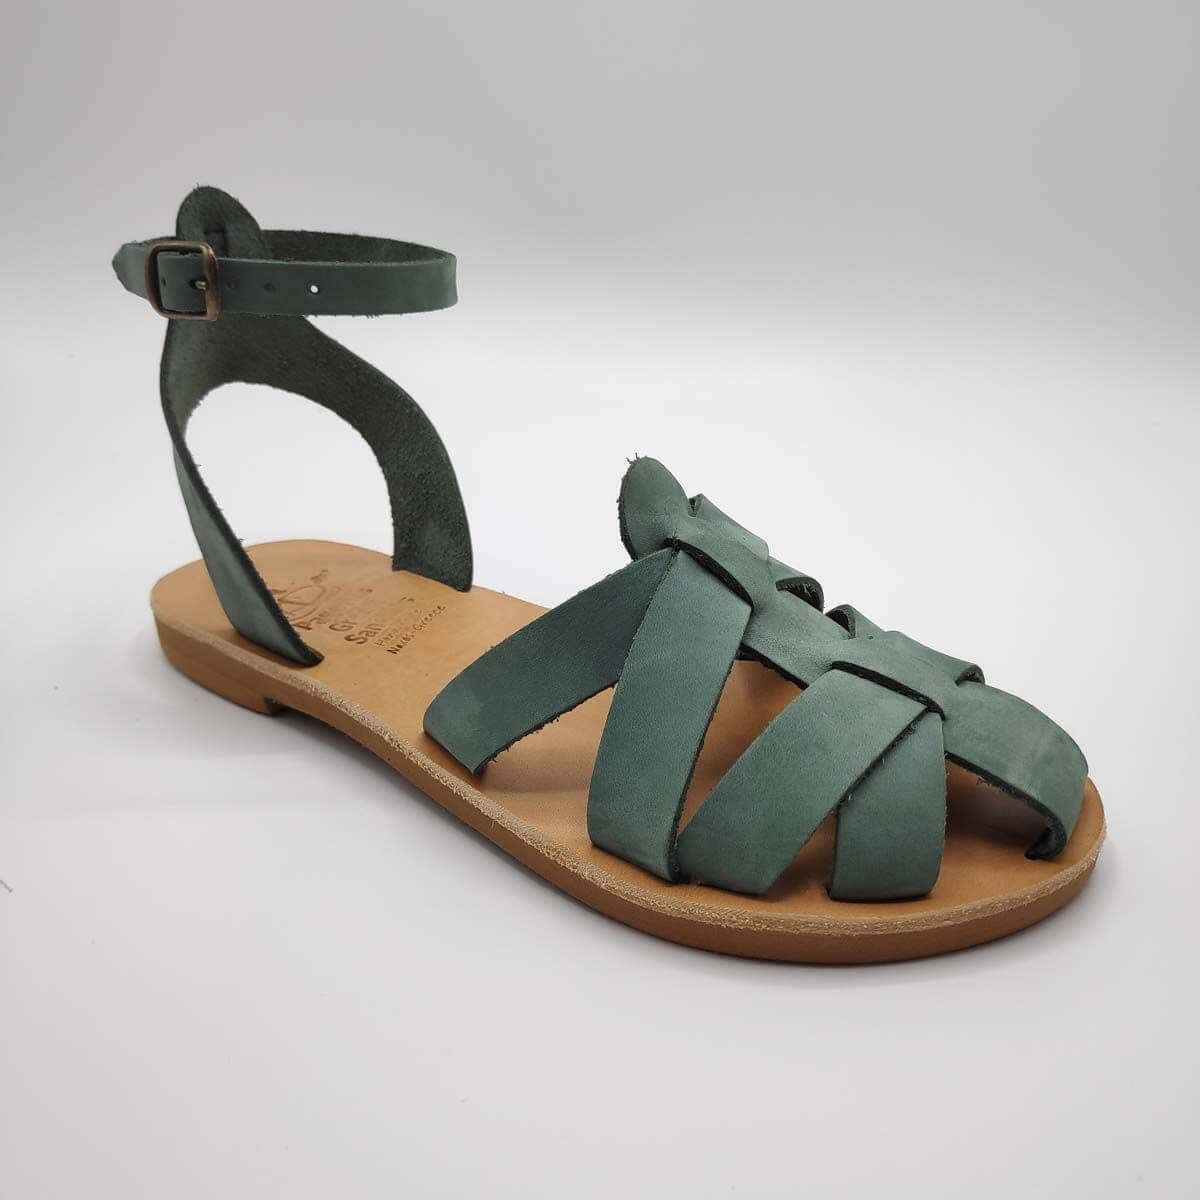 Lefkoni Closed Toe Leather Sandals | Pagonis Greek Sandals